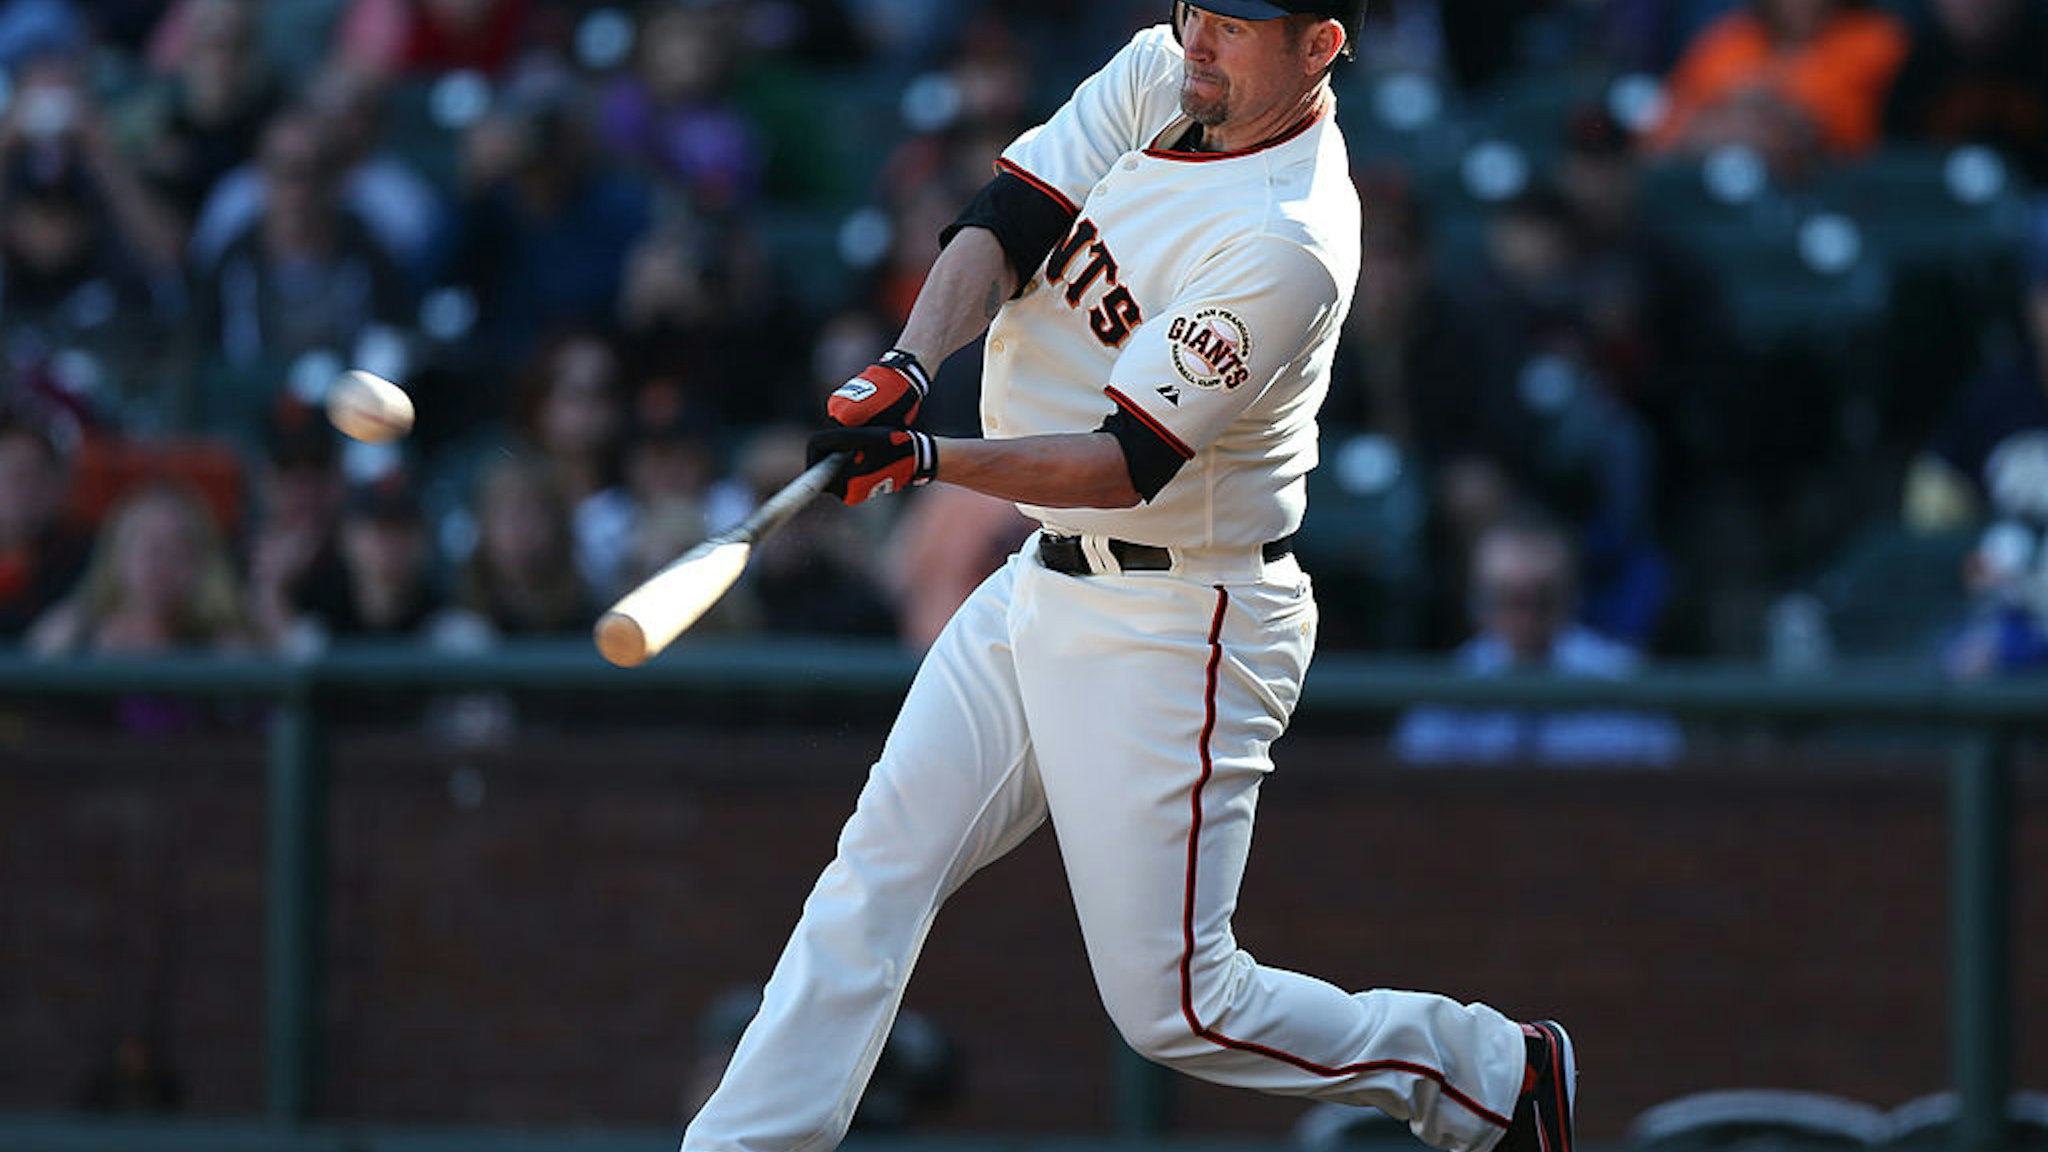 Aubrey Huff #17 of the San Francisco Giants bats against the San Diego Padres during the game at AT&amp;T Park on Sunday, September 23, 2012 in San Francisco, California.